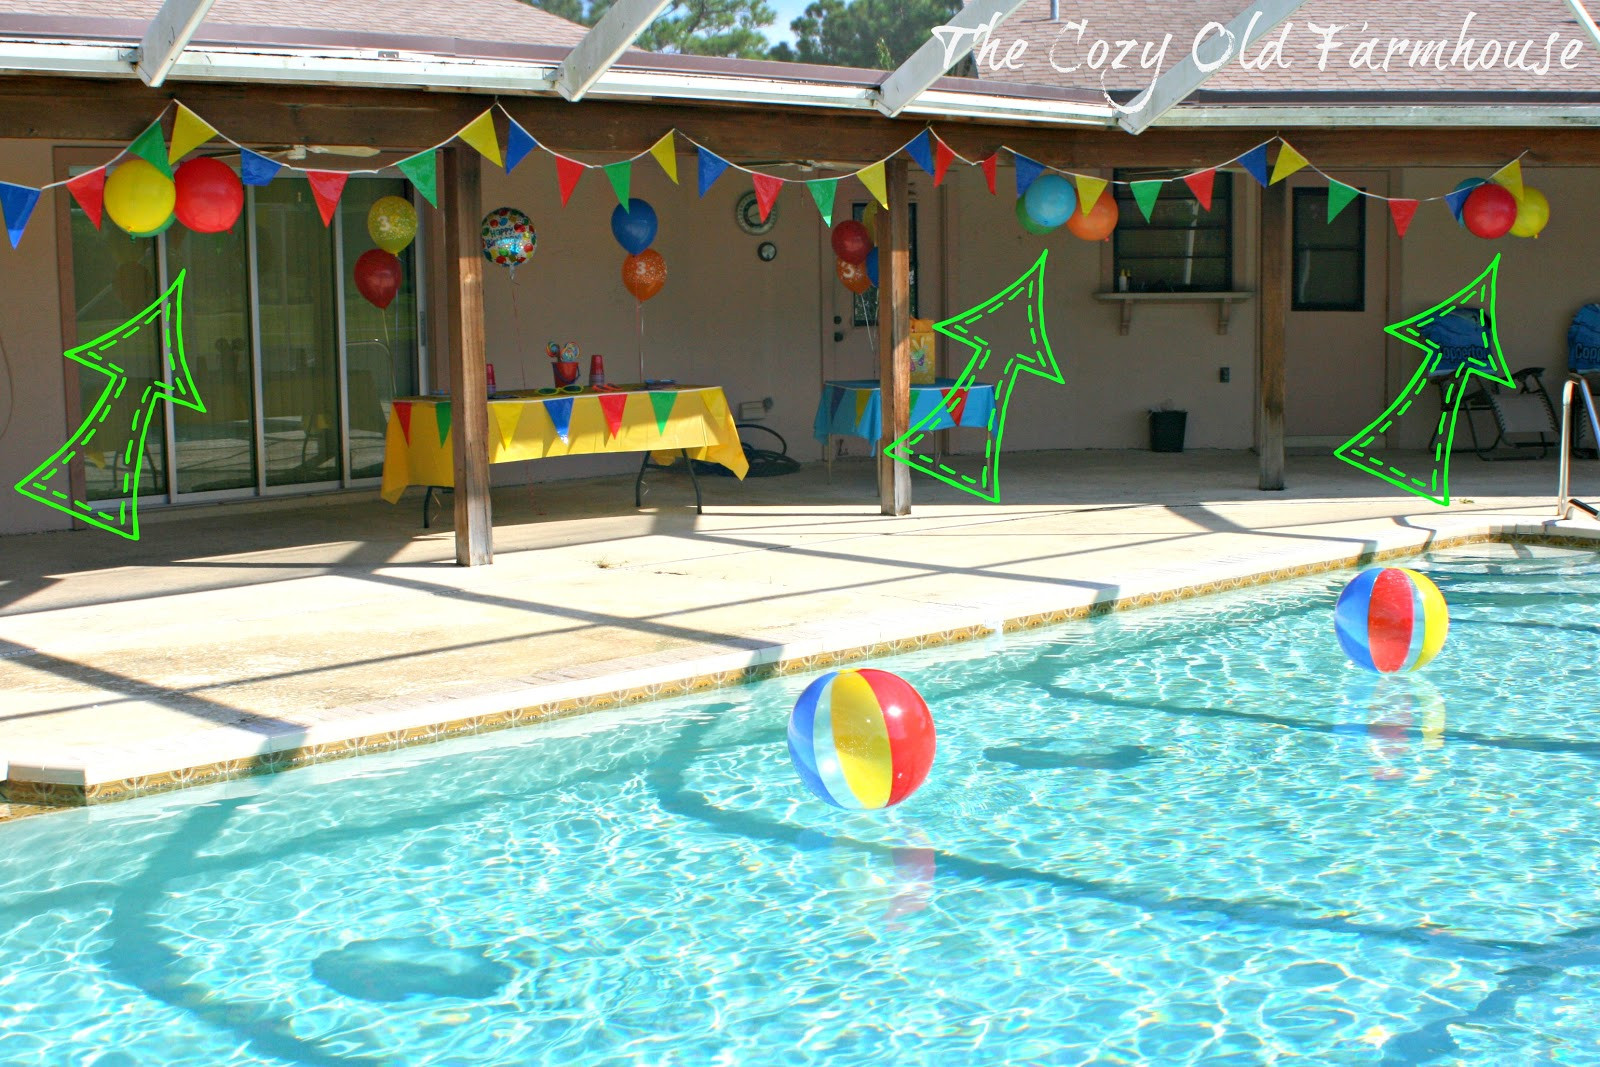 Pool Party Ideas For 2 Year Old
 The Cozy Old "Farmhouse" Simple and Bud Friendly Pool